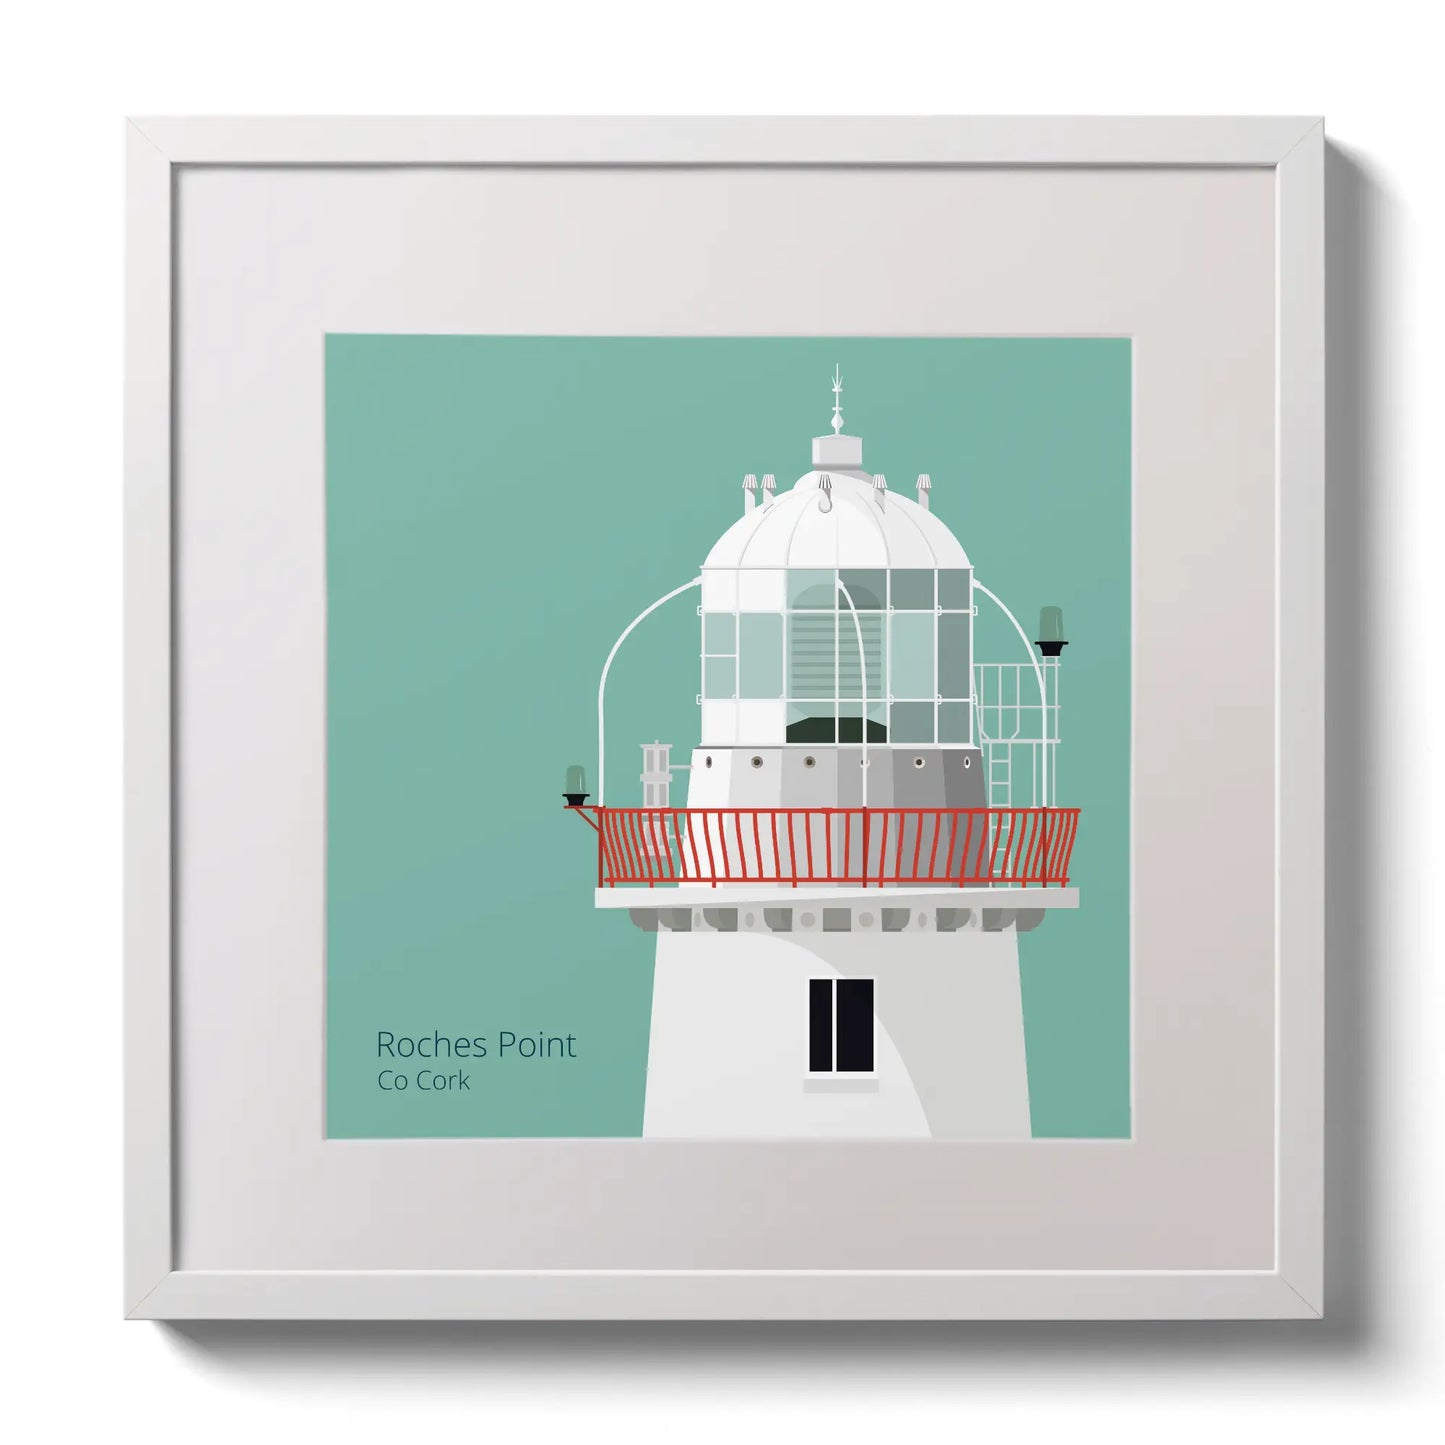 Illustration of Roches Point lighthouse on an ocean green background,  in a white square frame measuring 30x30cm.